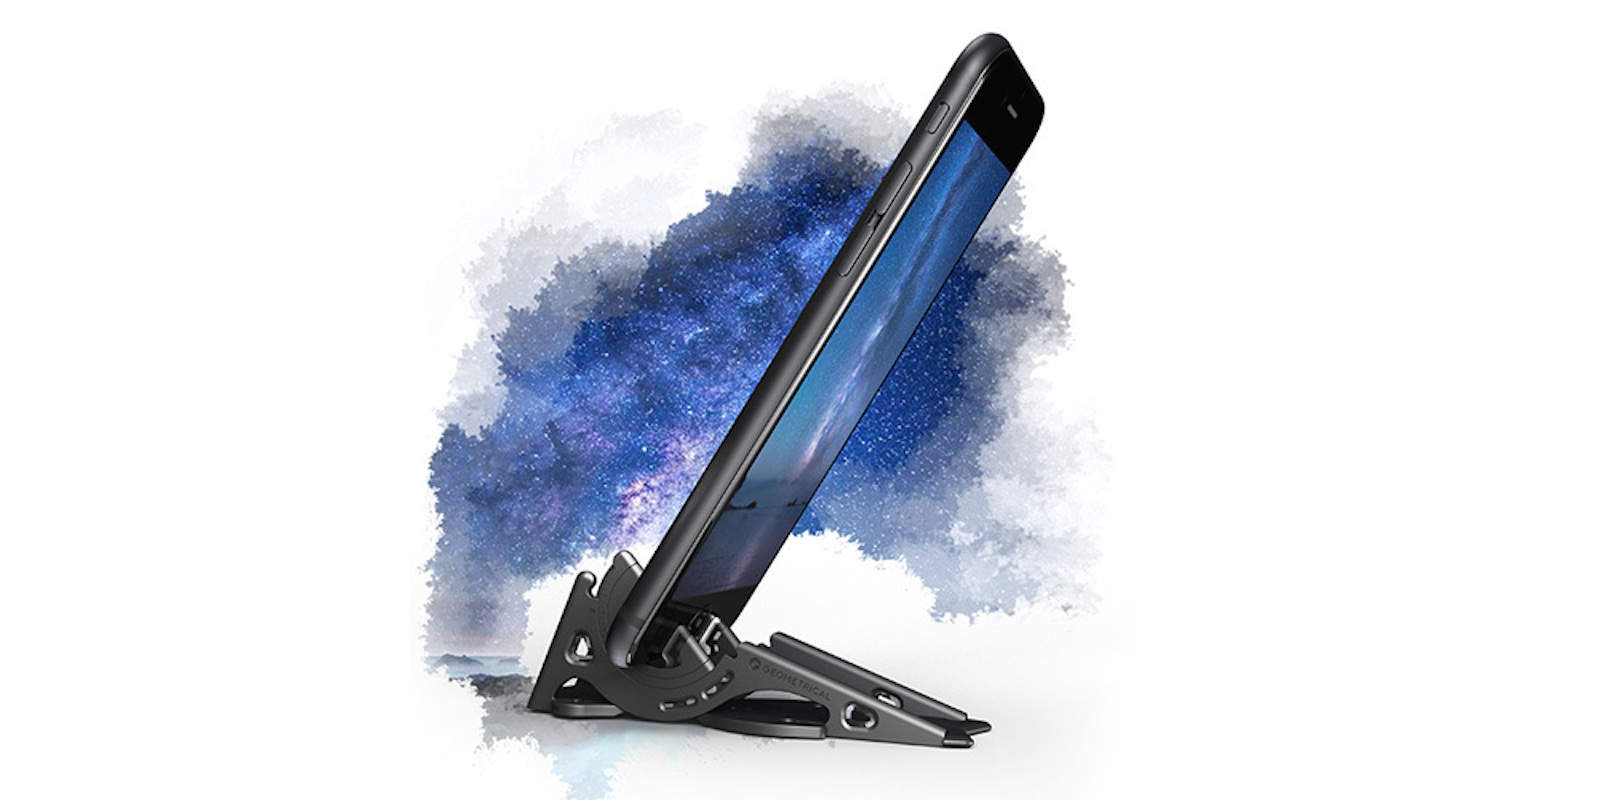 This fully featured, sturdy tripod folds up into credit card size and fits right into your wallet.